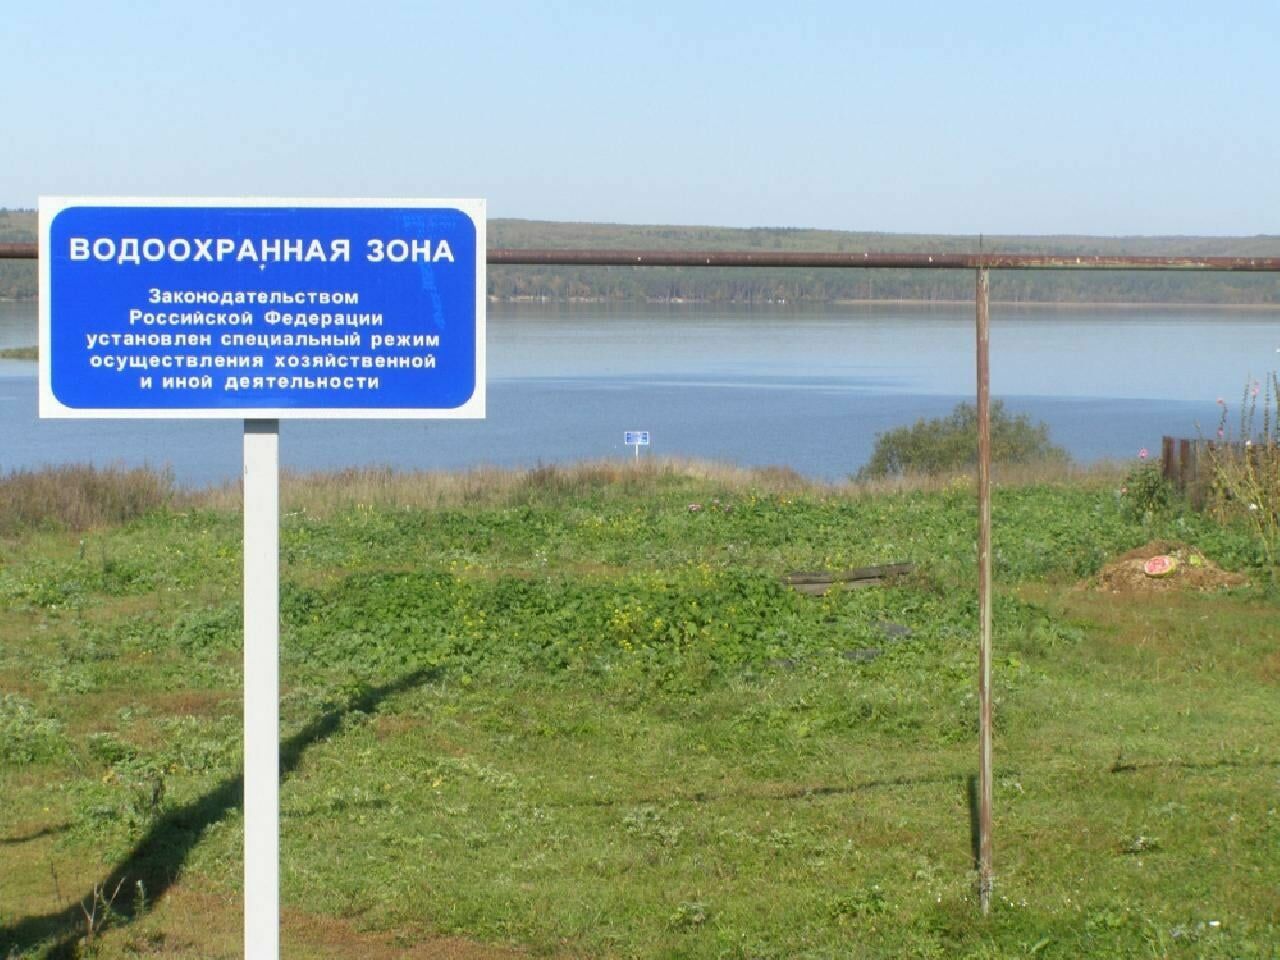 Russians were deprived of the coast: the State Duma adopted a scandalous law on sanitary zones